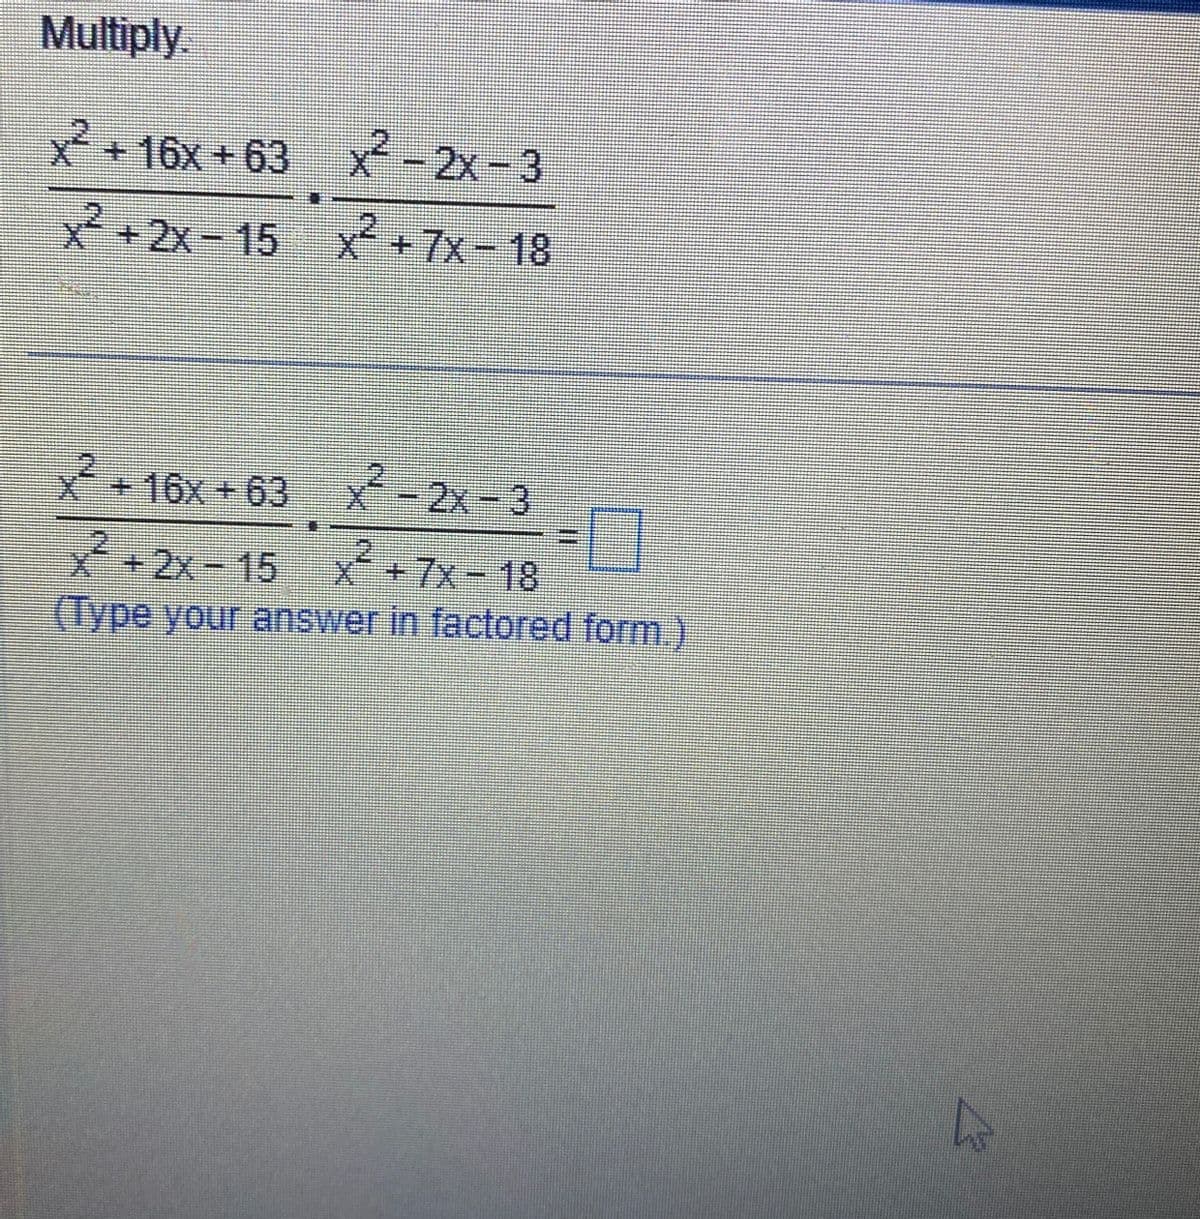 Multiply
x² +16x+63
X
x²+2x-15
x² - 2x-3
x² + 7x - 18
x²+16x+63
x² - 2x-3
30
x²+2x-15 x²+7x-18
(Type your answer in factored form.)
A